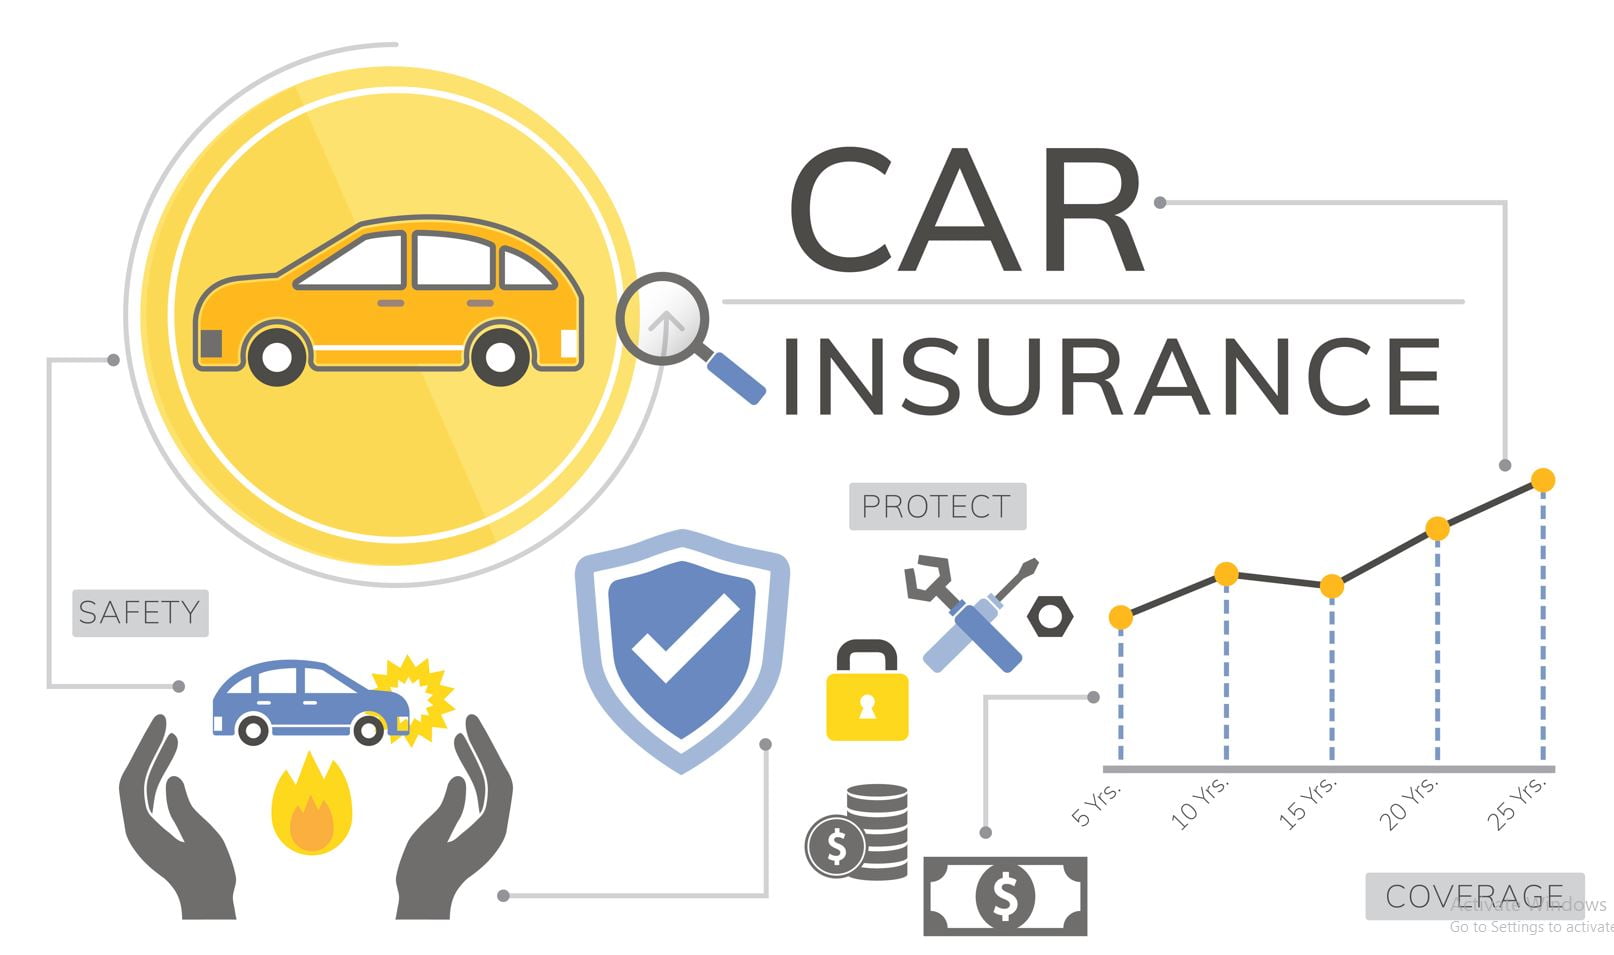 car insurance quote